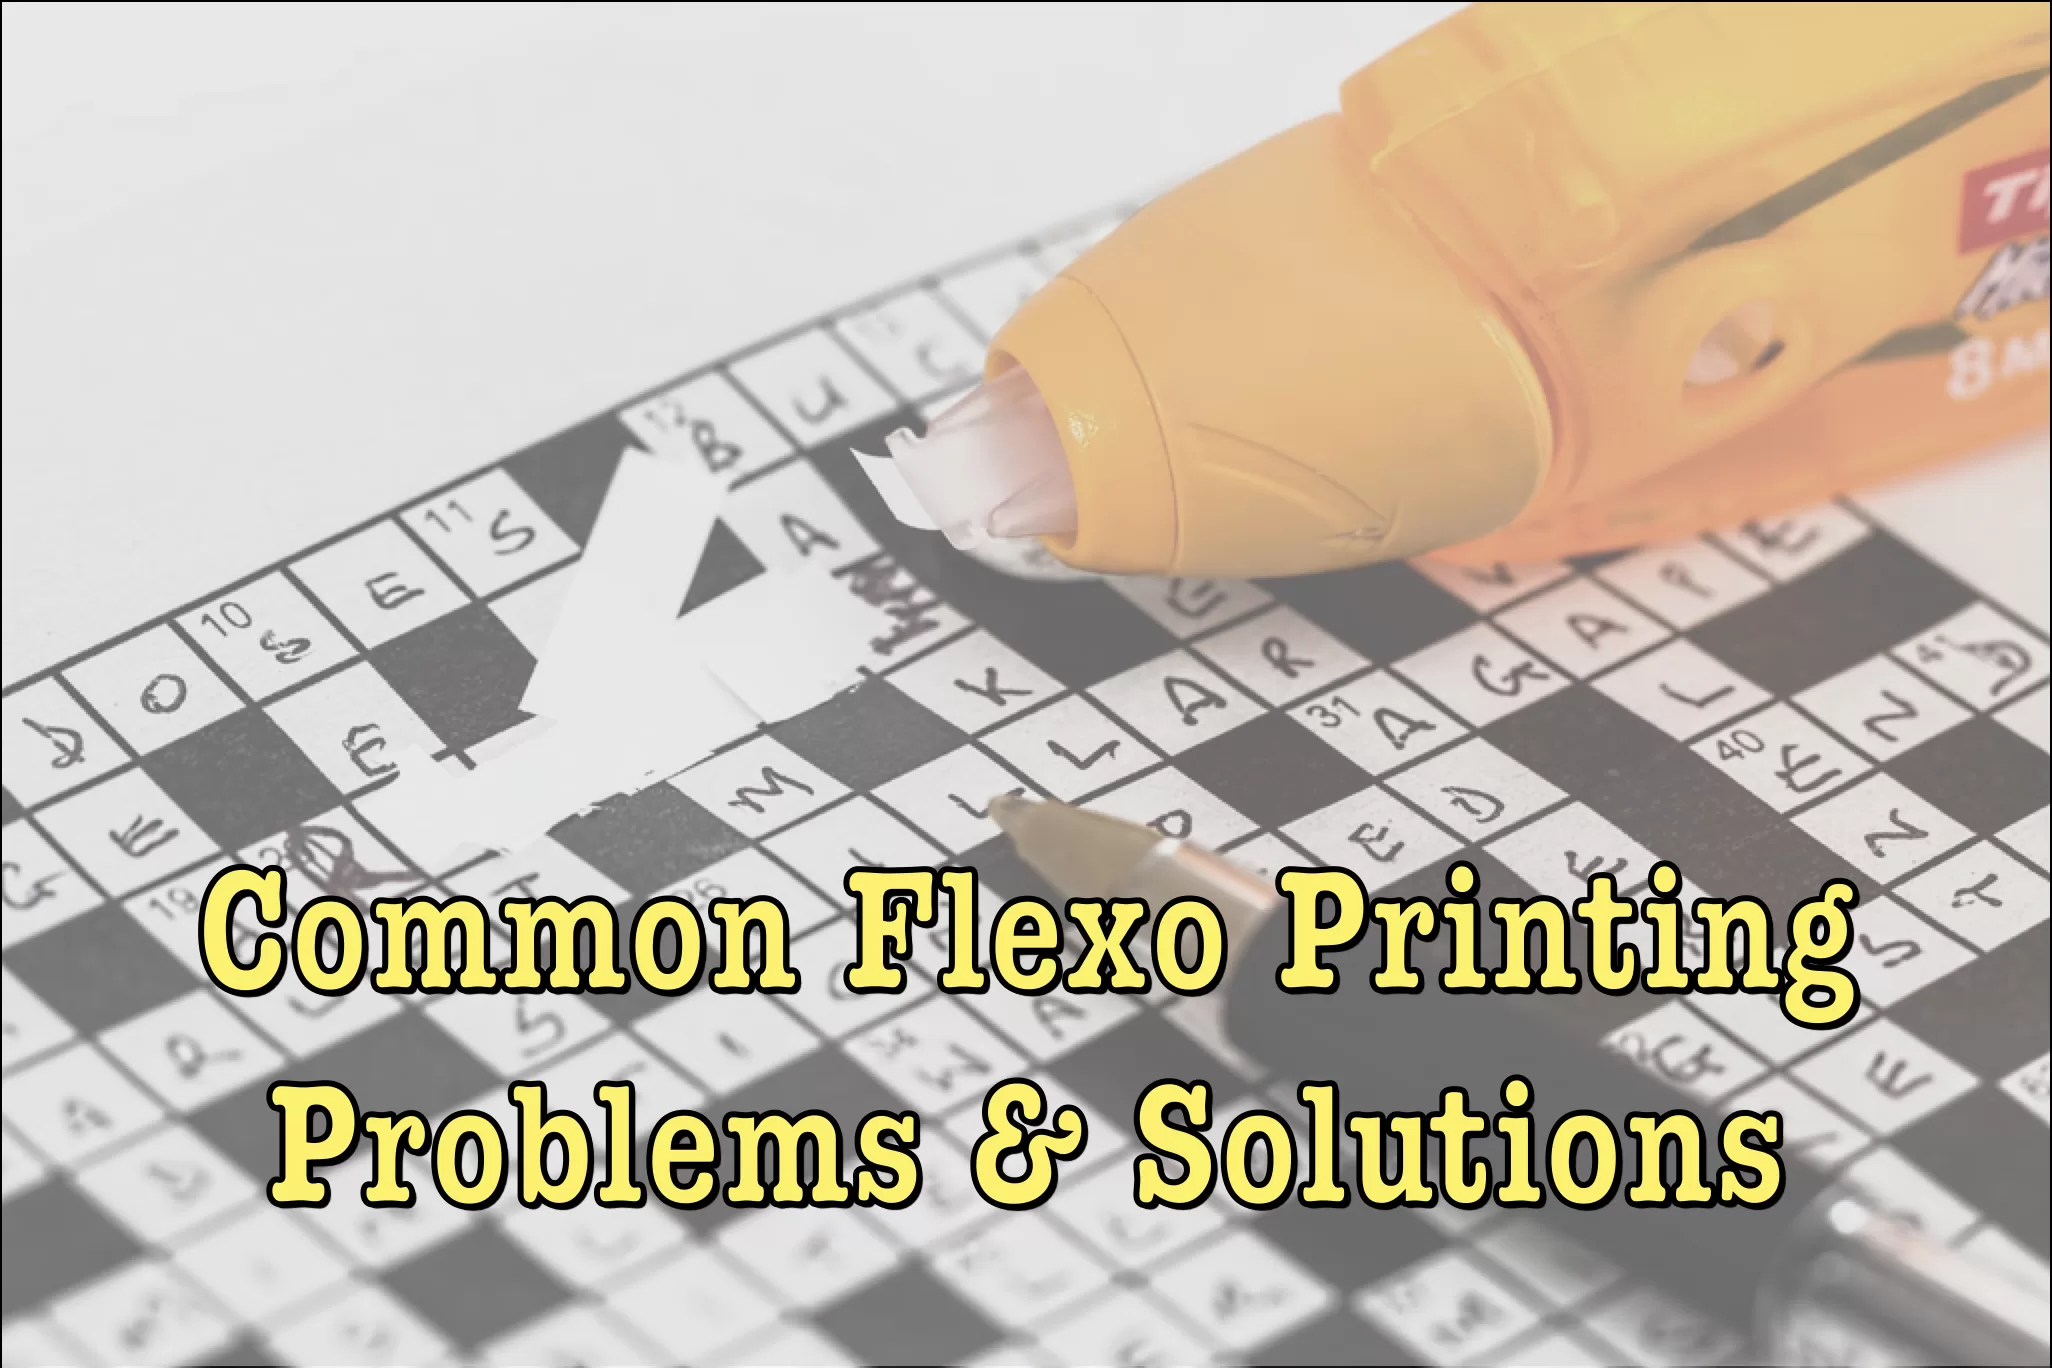 Flexo Printing Defects & Solutions